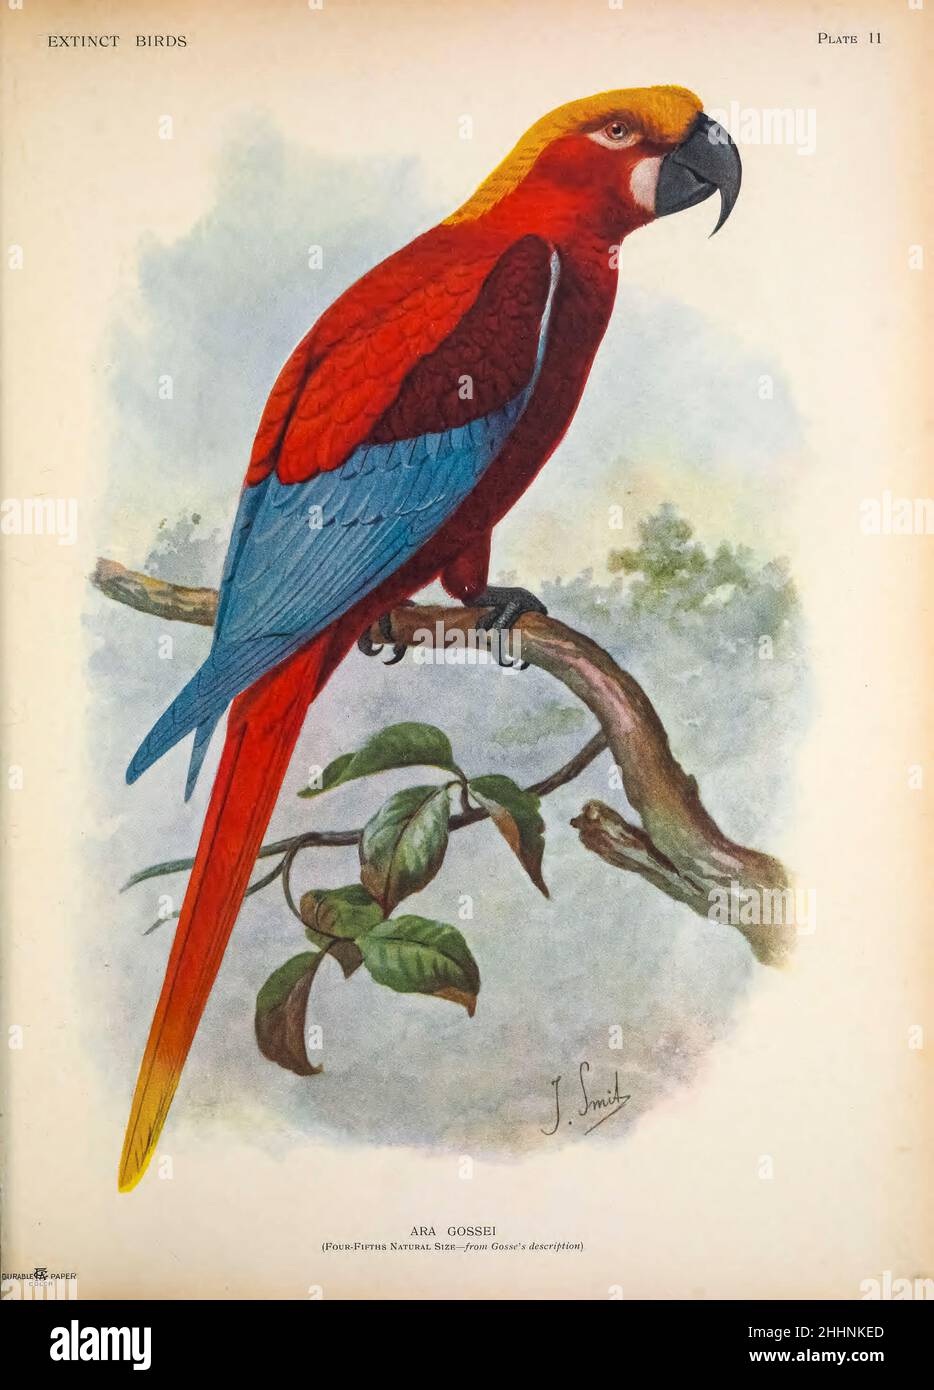 The Jamaican red macaw (Ara gossei) is a hypothetical species of parrot in the family Psittacidae that lived on Jamaica. Hypothetical restoration of a Jamaican red macaw by Joseph Smit, 1907 from ' Extinct birds ' : an attempt to unite in one volume a short account of those birds which have become extinct in historical times : that is, within the last six or seven hundred years : to which are added a few which still exist, but are on the verge of extinction. by Baron, Lionel Walter Rothschild, 1868-1937 Published 1907 as a limited edition book in London by Hutchinson & Co. Stock Photo